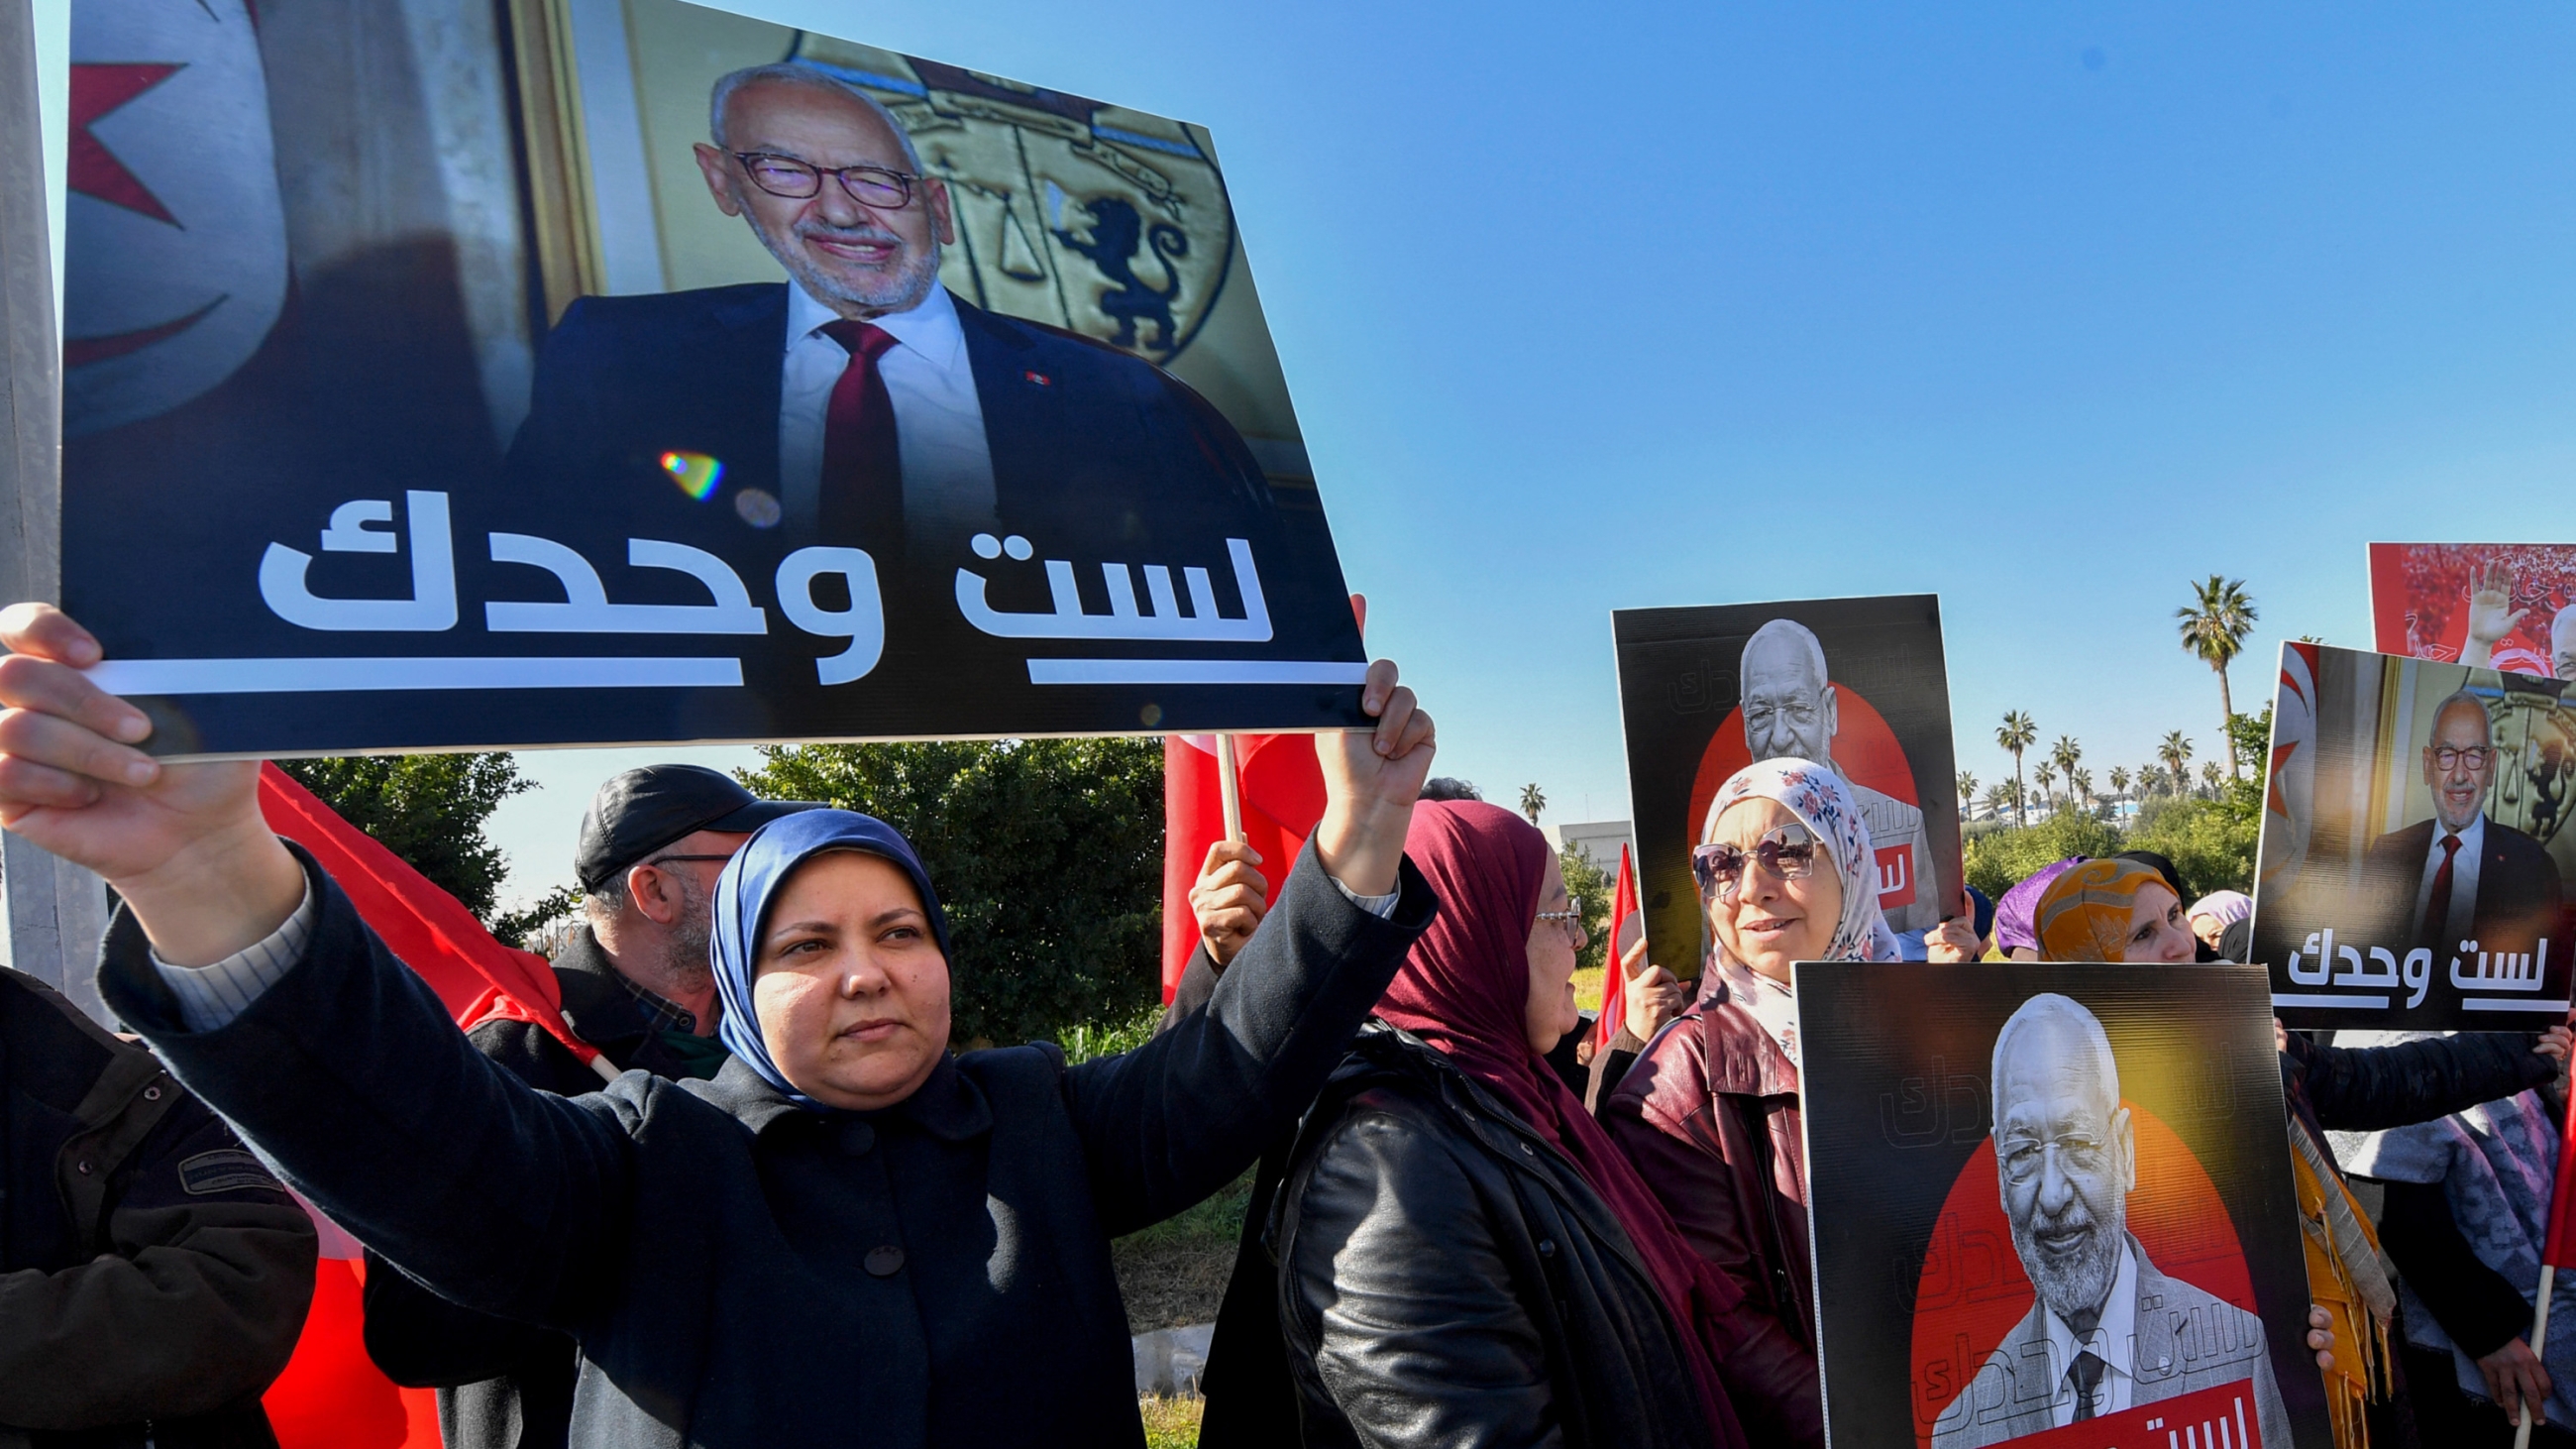 Supporters of the Ennahda leader Rached Ghannouchi express their support as he arrives at a police station in Tunis, 21 February 2023 (AFP)